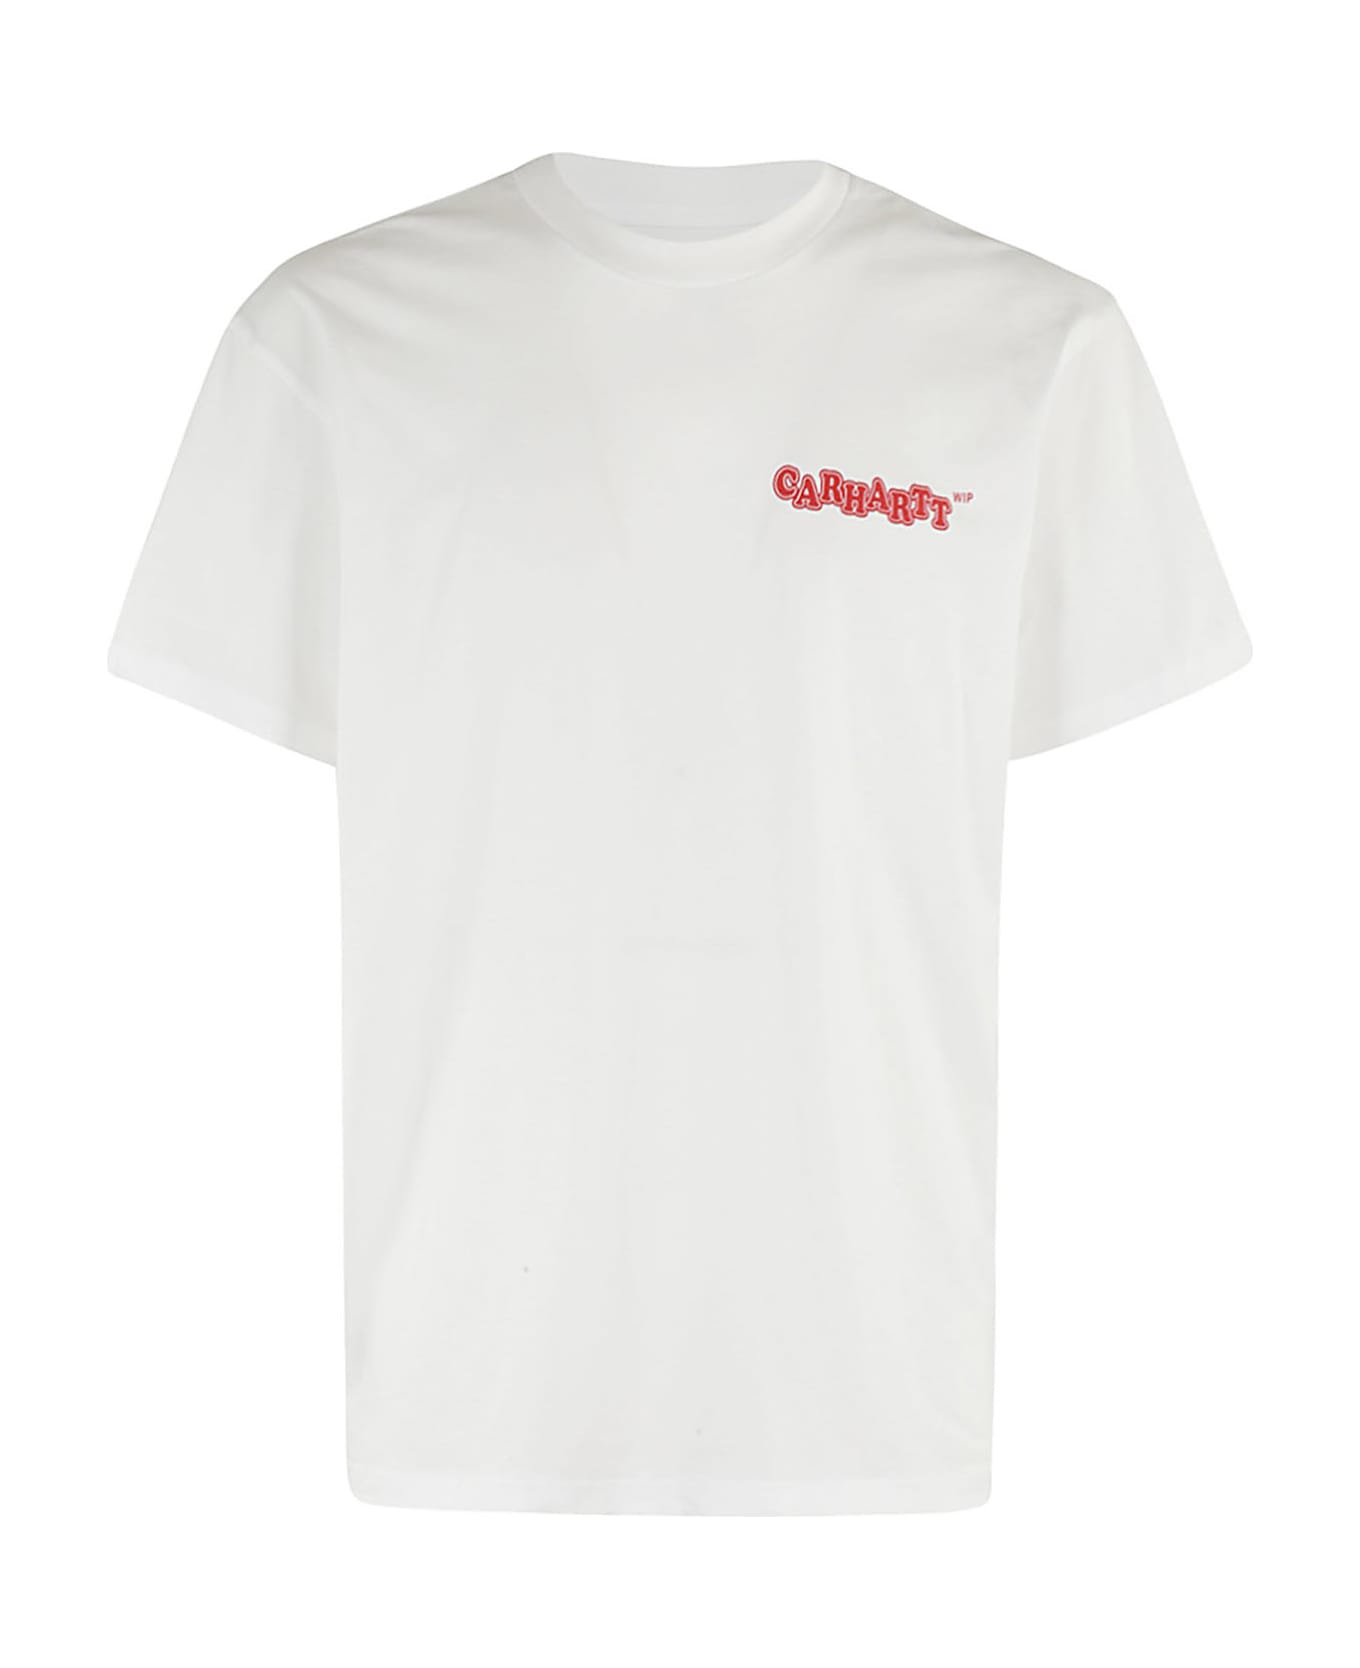 Carhartt Ss Fast Food - White Red シャツ